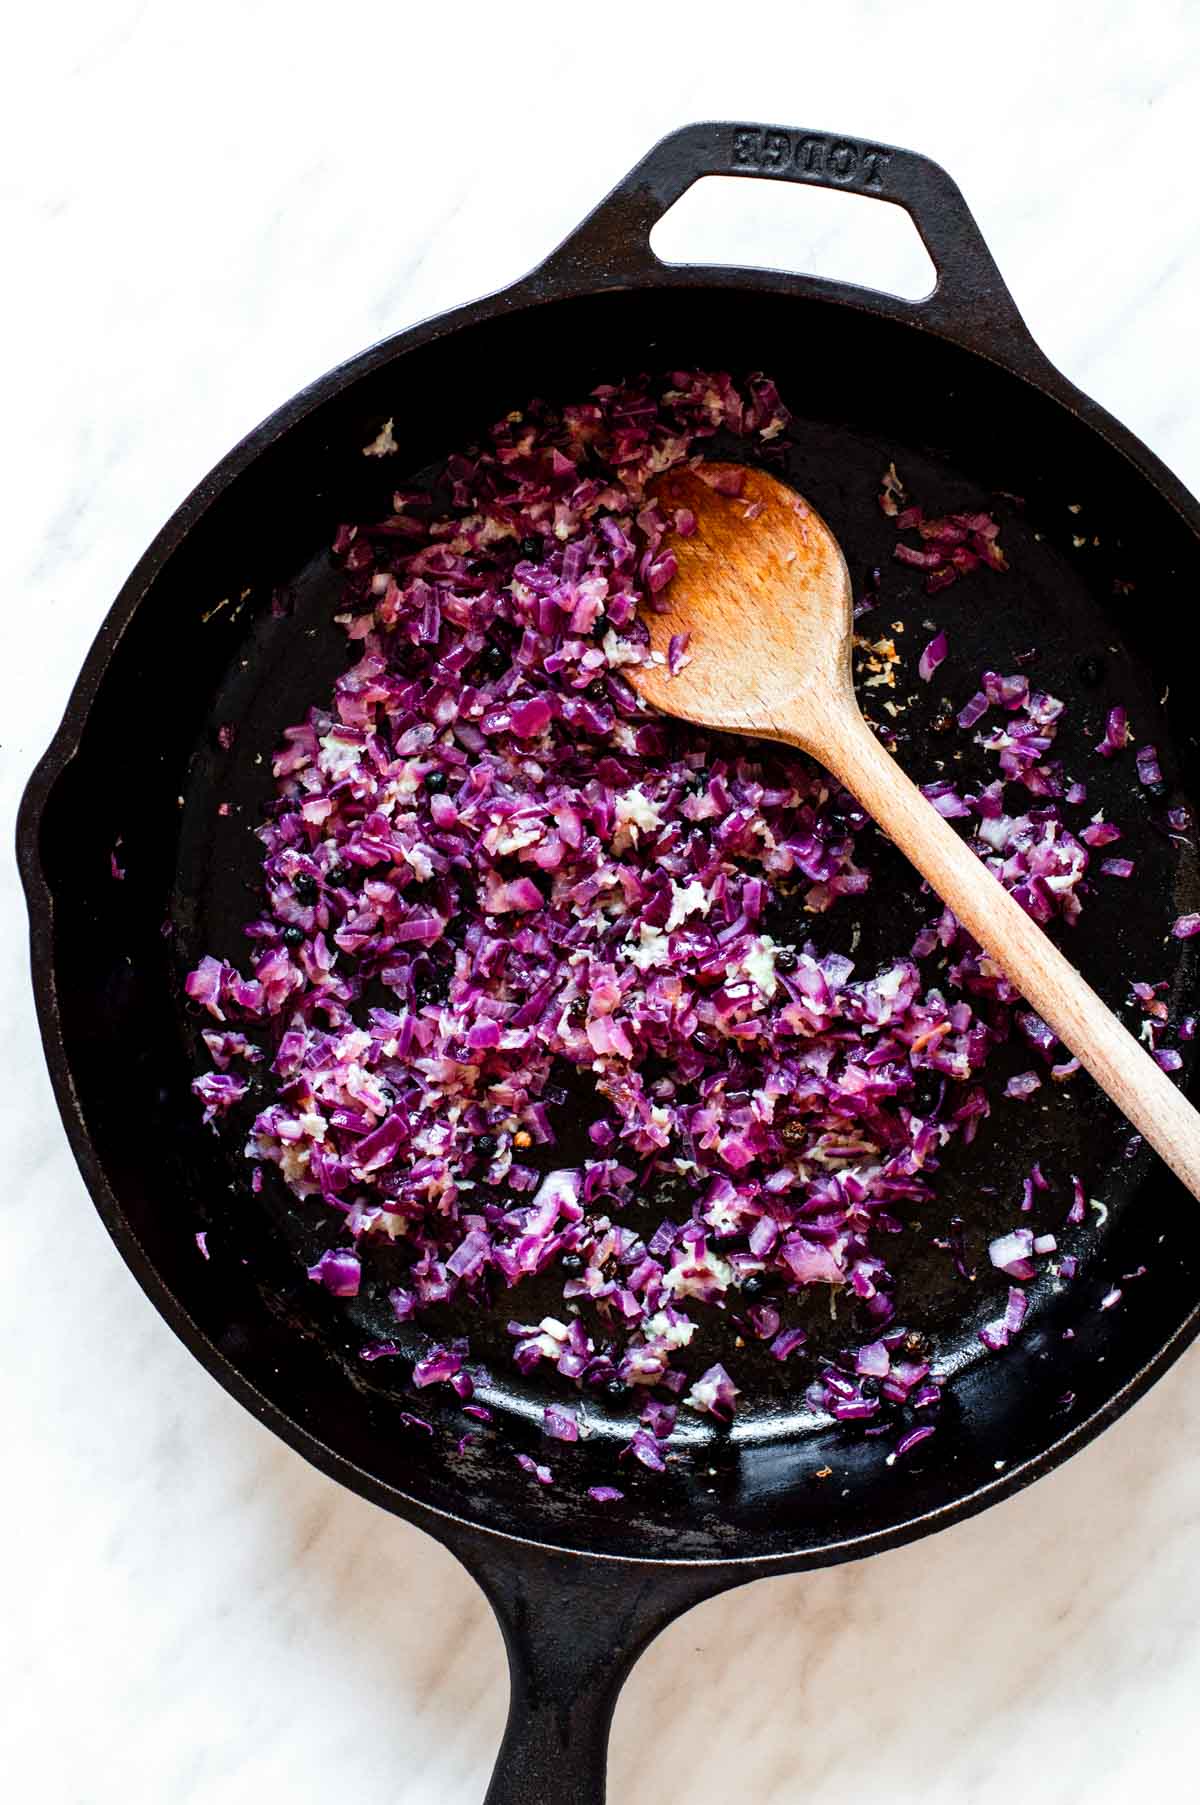 Sauteing red onion and minced garlic in a cast-iron skillet.